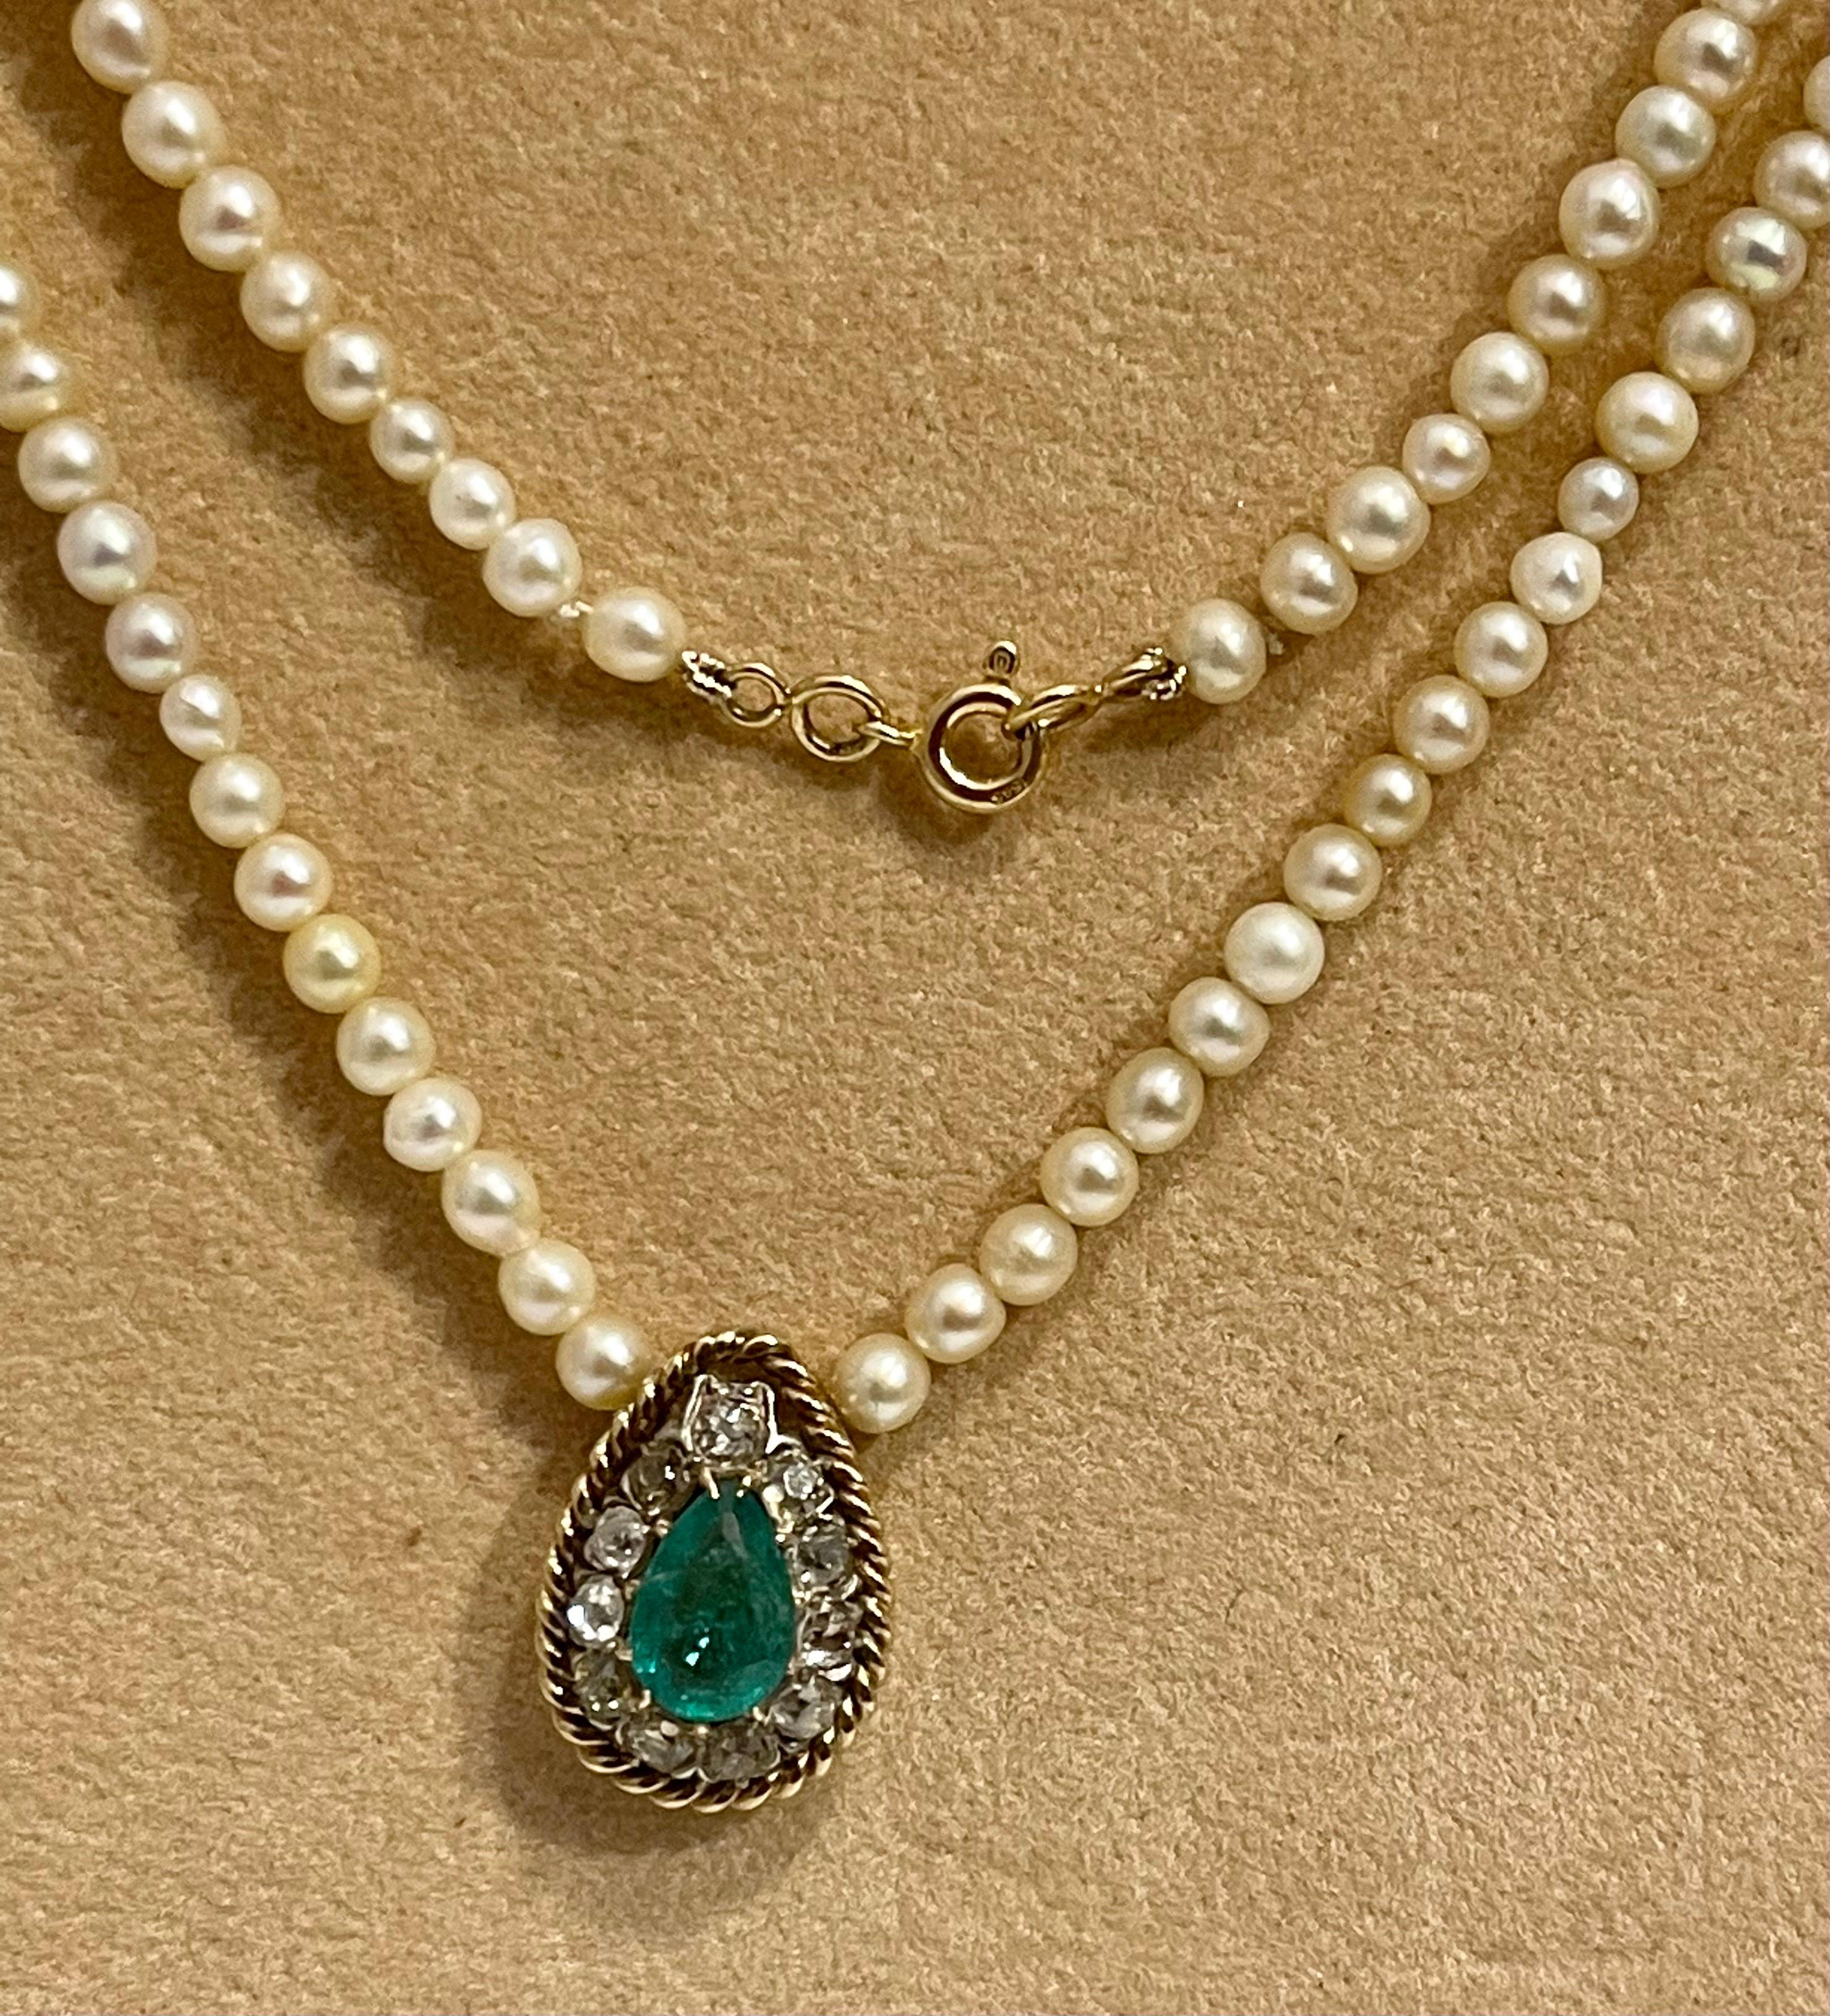 Emerald Cut 120 Years Old GIA Certified Natural Basra Pearls & Emerald Necklace 14KY Gold For Sale